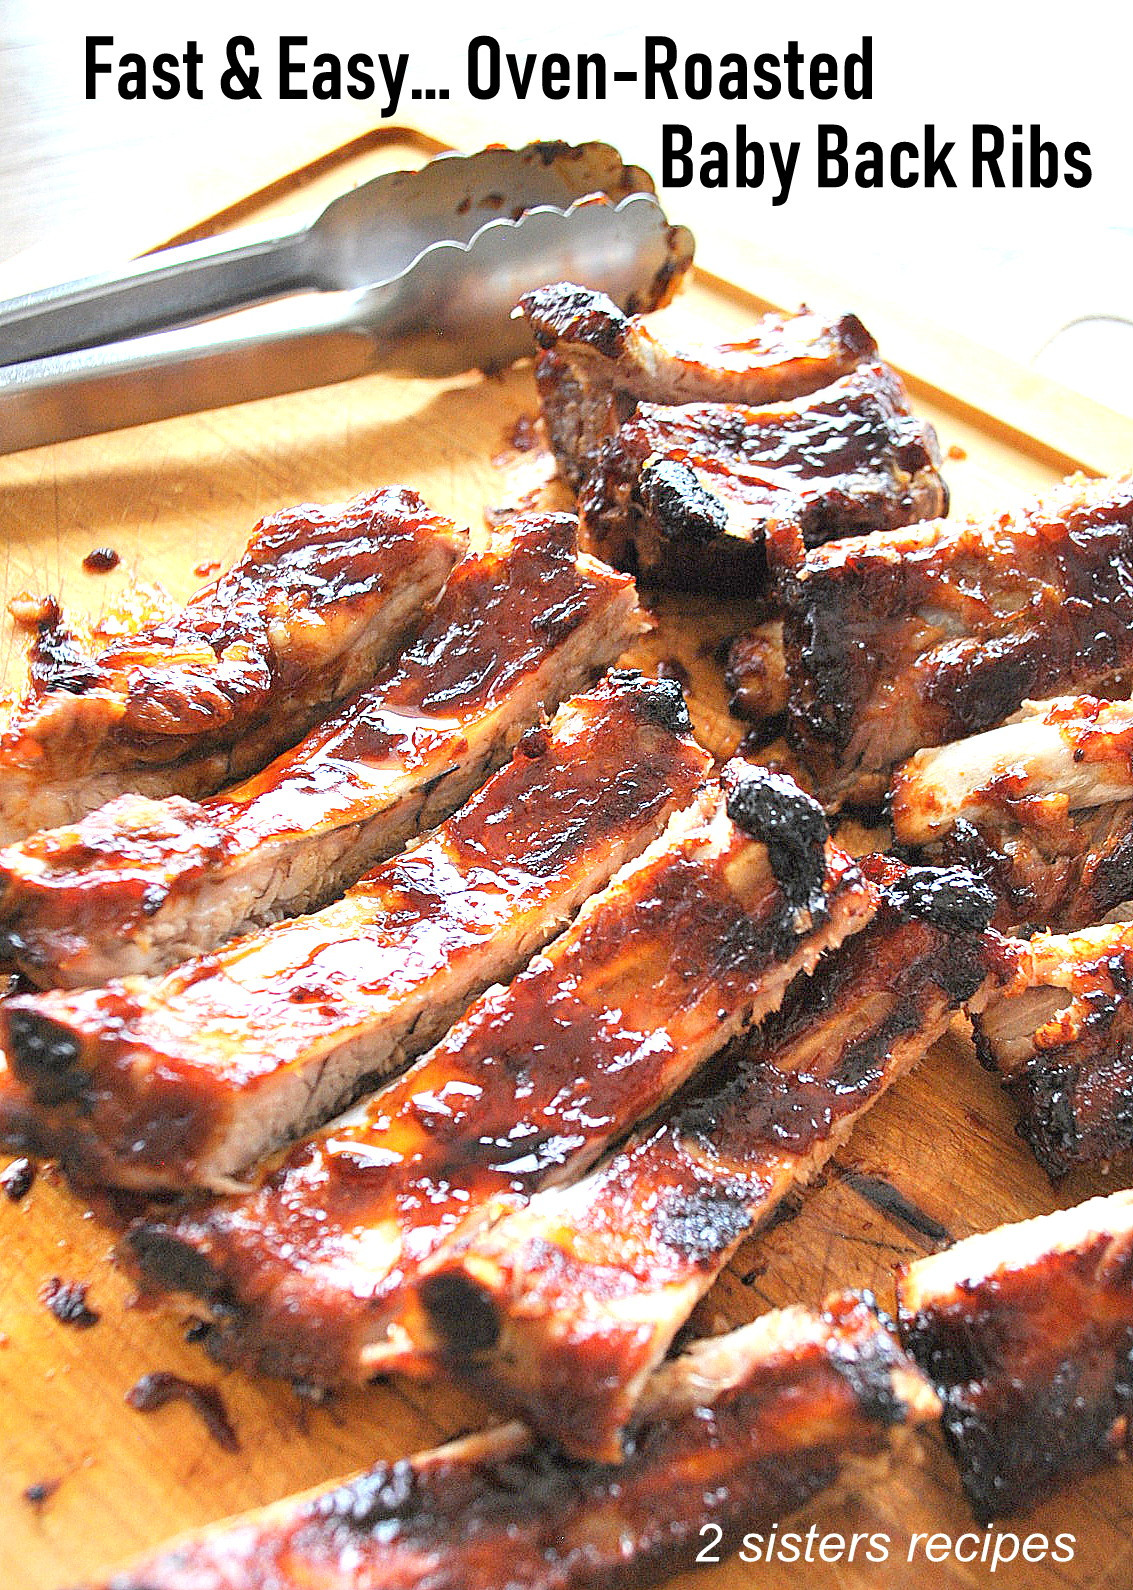 Recipes Baby Back Ribs Oven
 Fast & Easy Oven Roasted Baby Back Ribs 2 Sisters